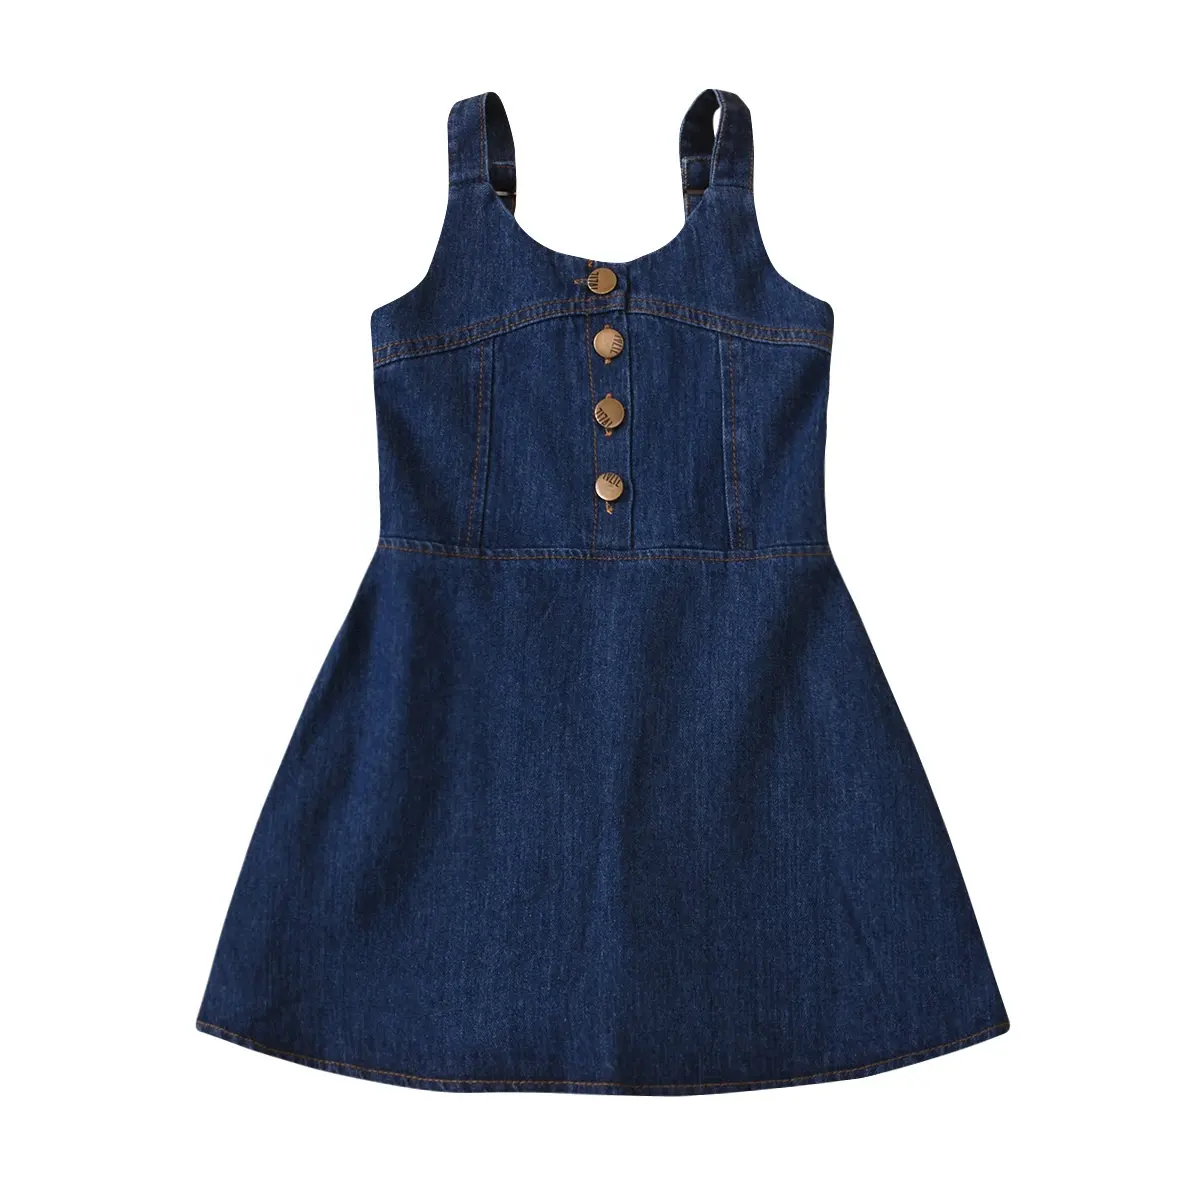 Baby Party Frocks Summer Dress For Girls Holiday Denim Fashion Little Kids Child Clothing Dresses